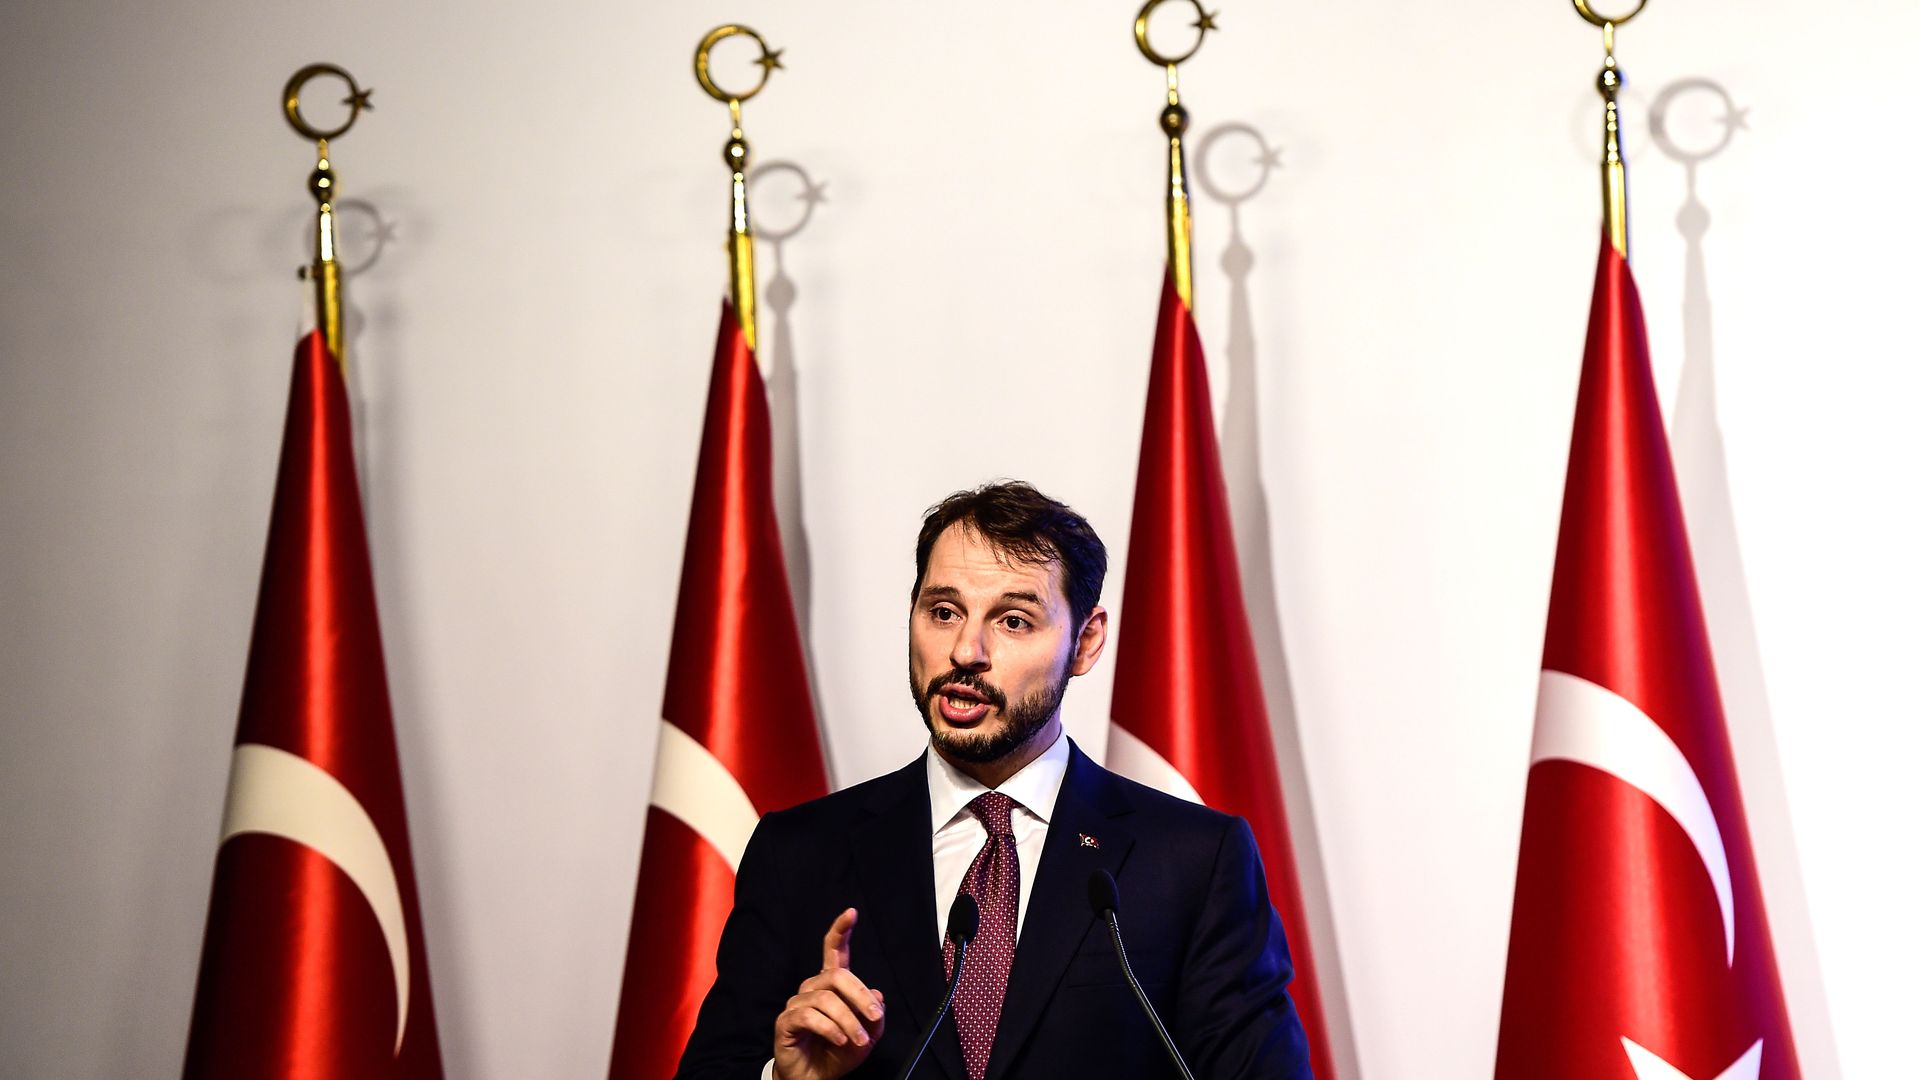 Turkish finance minister giving a speech in front of four red flags